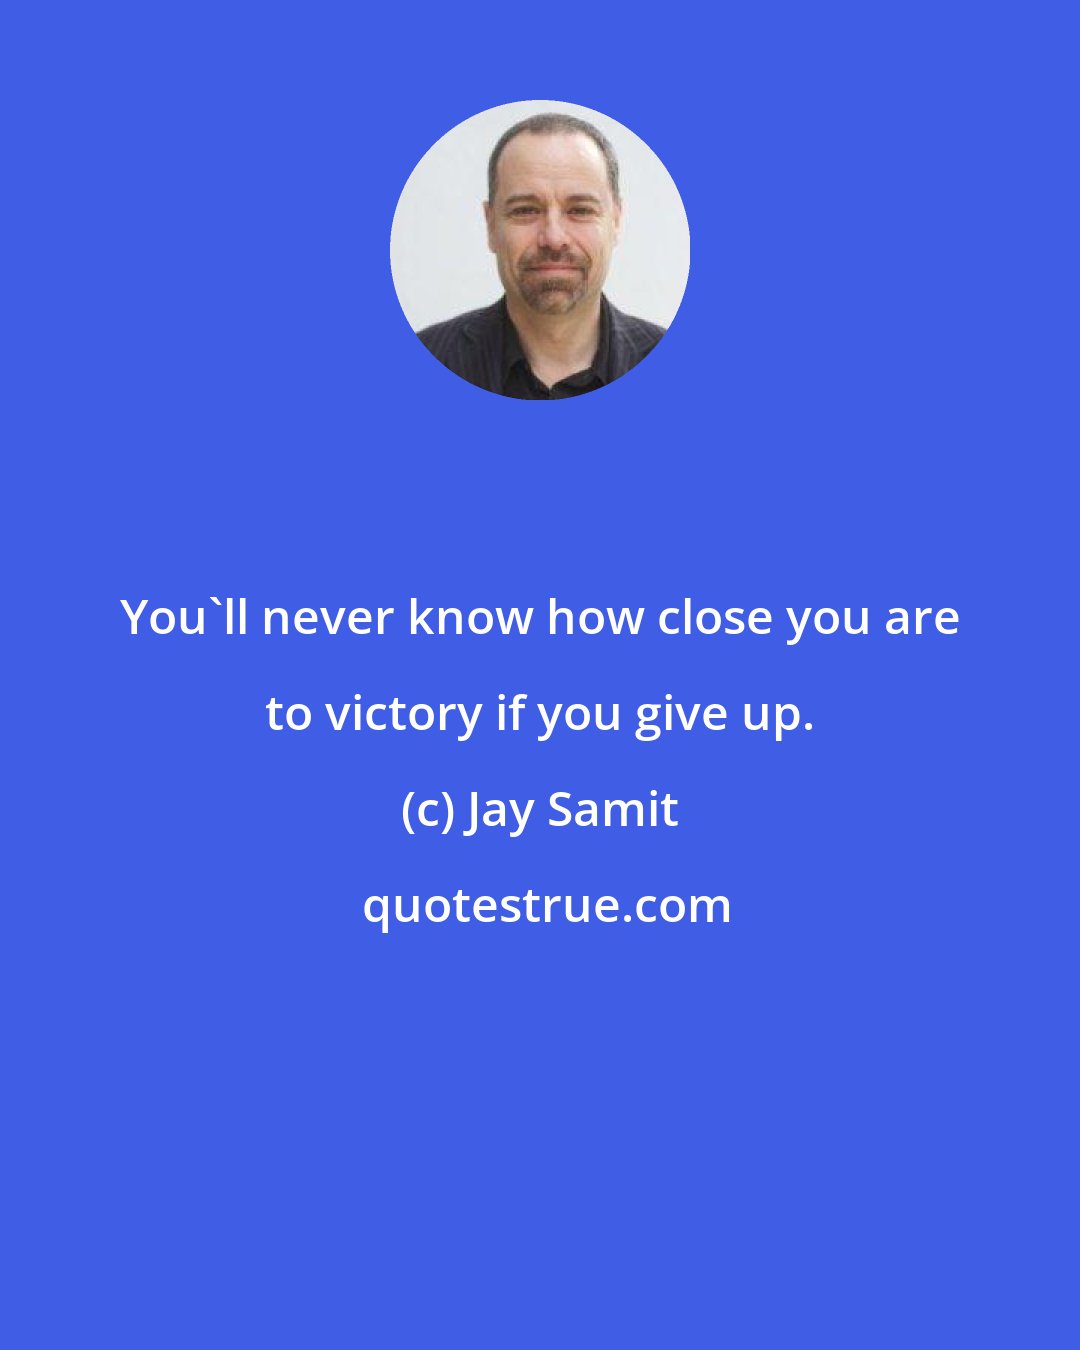 Jay Samit: You'll never know how close you are to victory if you give up.